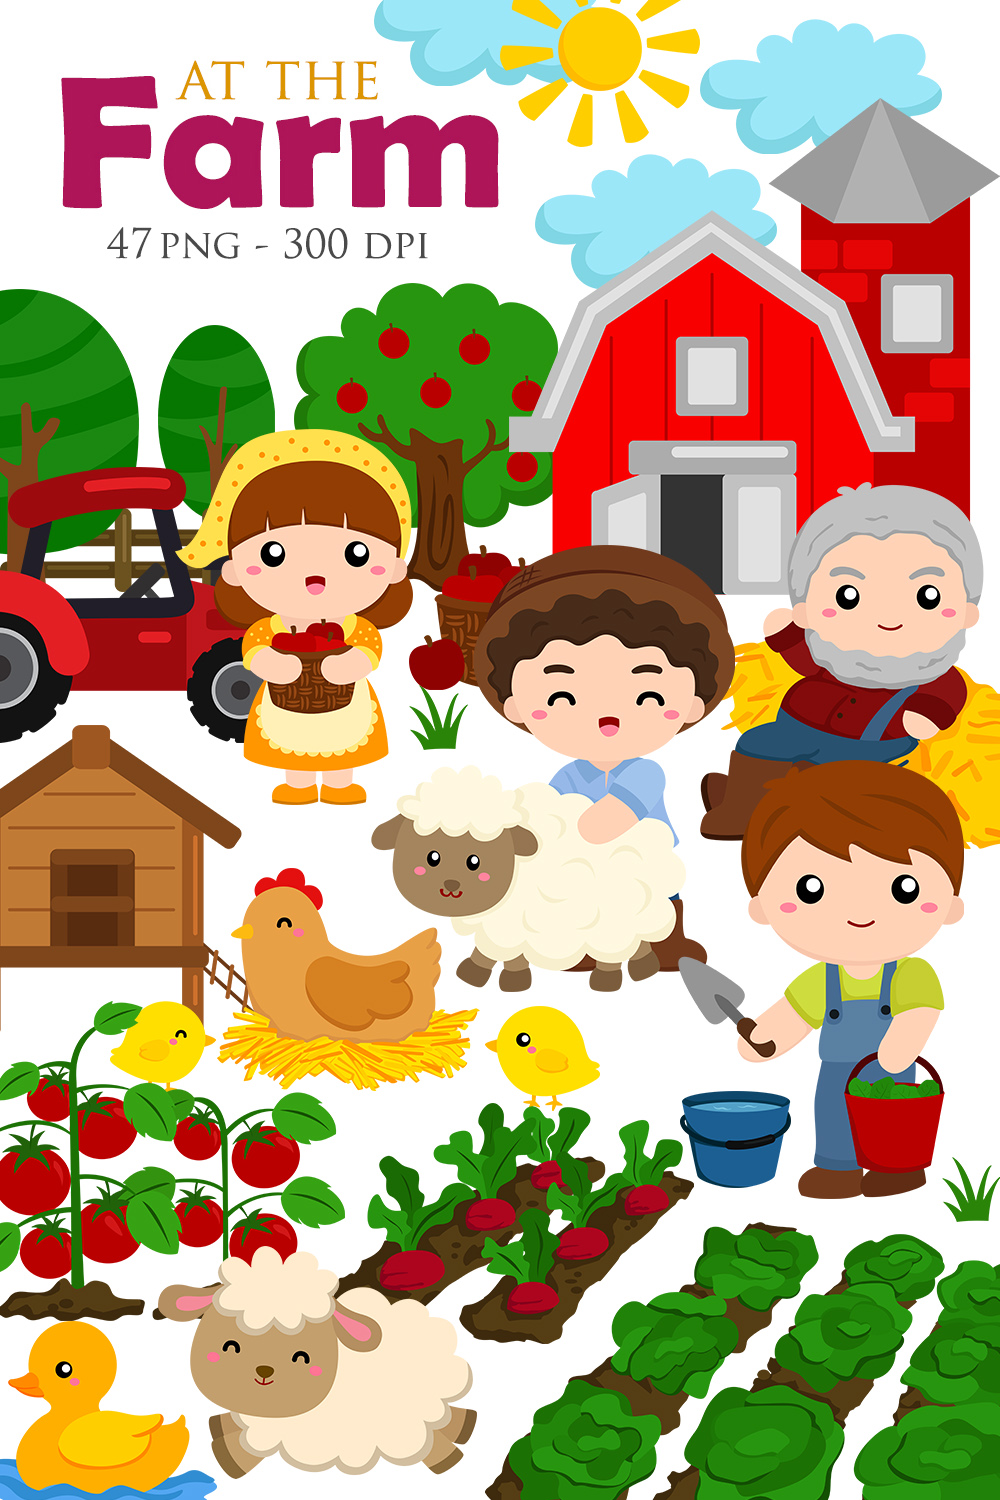 Cute and Fun At The Farm with Farmer Family and Animals Doing Harvest Vegetables with Tractor Barn Horse Sheep Cow Chicken Pig Duck Cartoon Illustration Vector Clipart Sticker Decoration Background Bundles Art pinterest preview image.